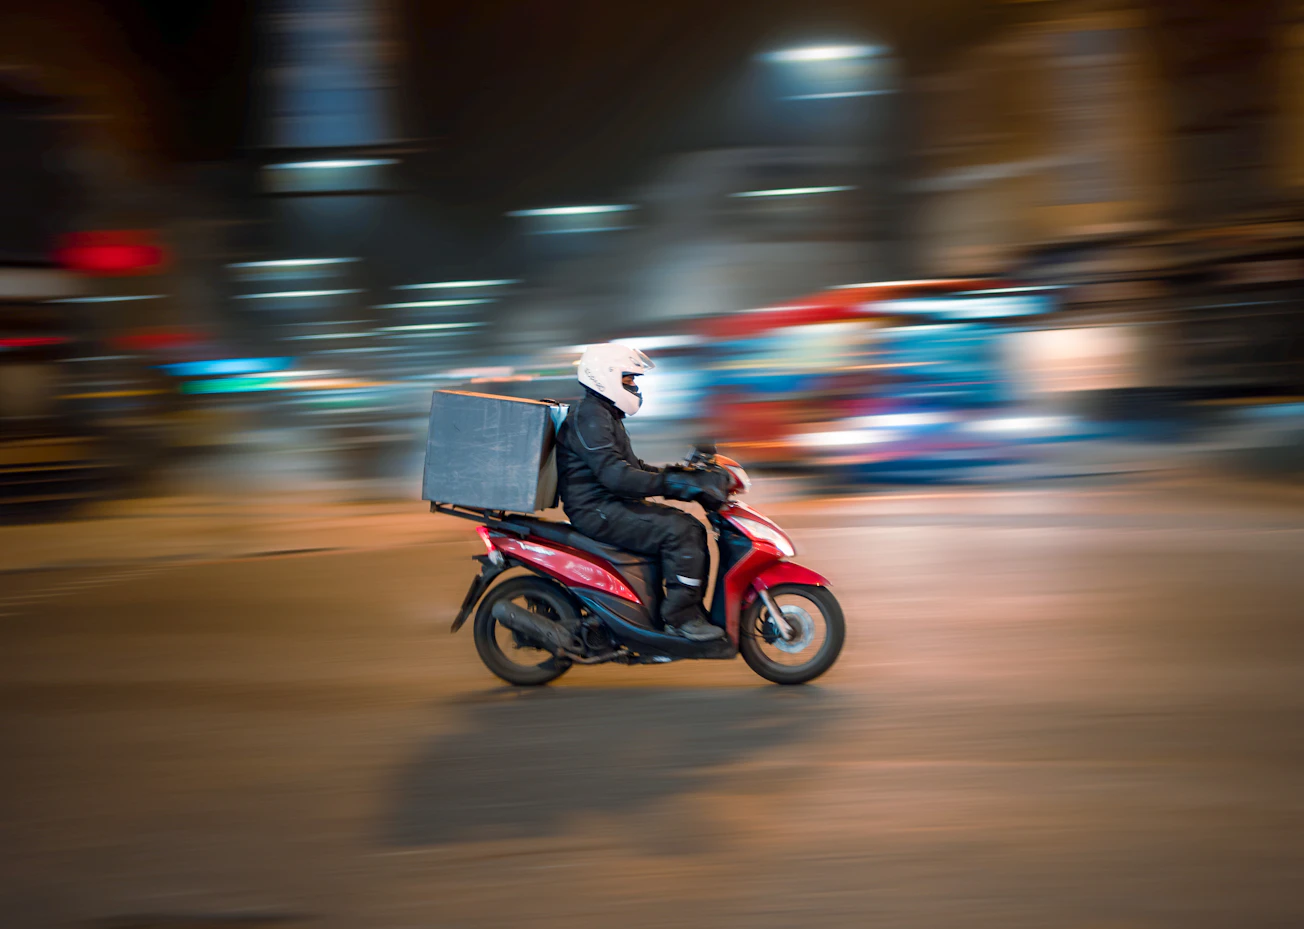 The meal delivery industry is experiencing slower growth